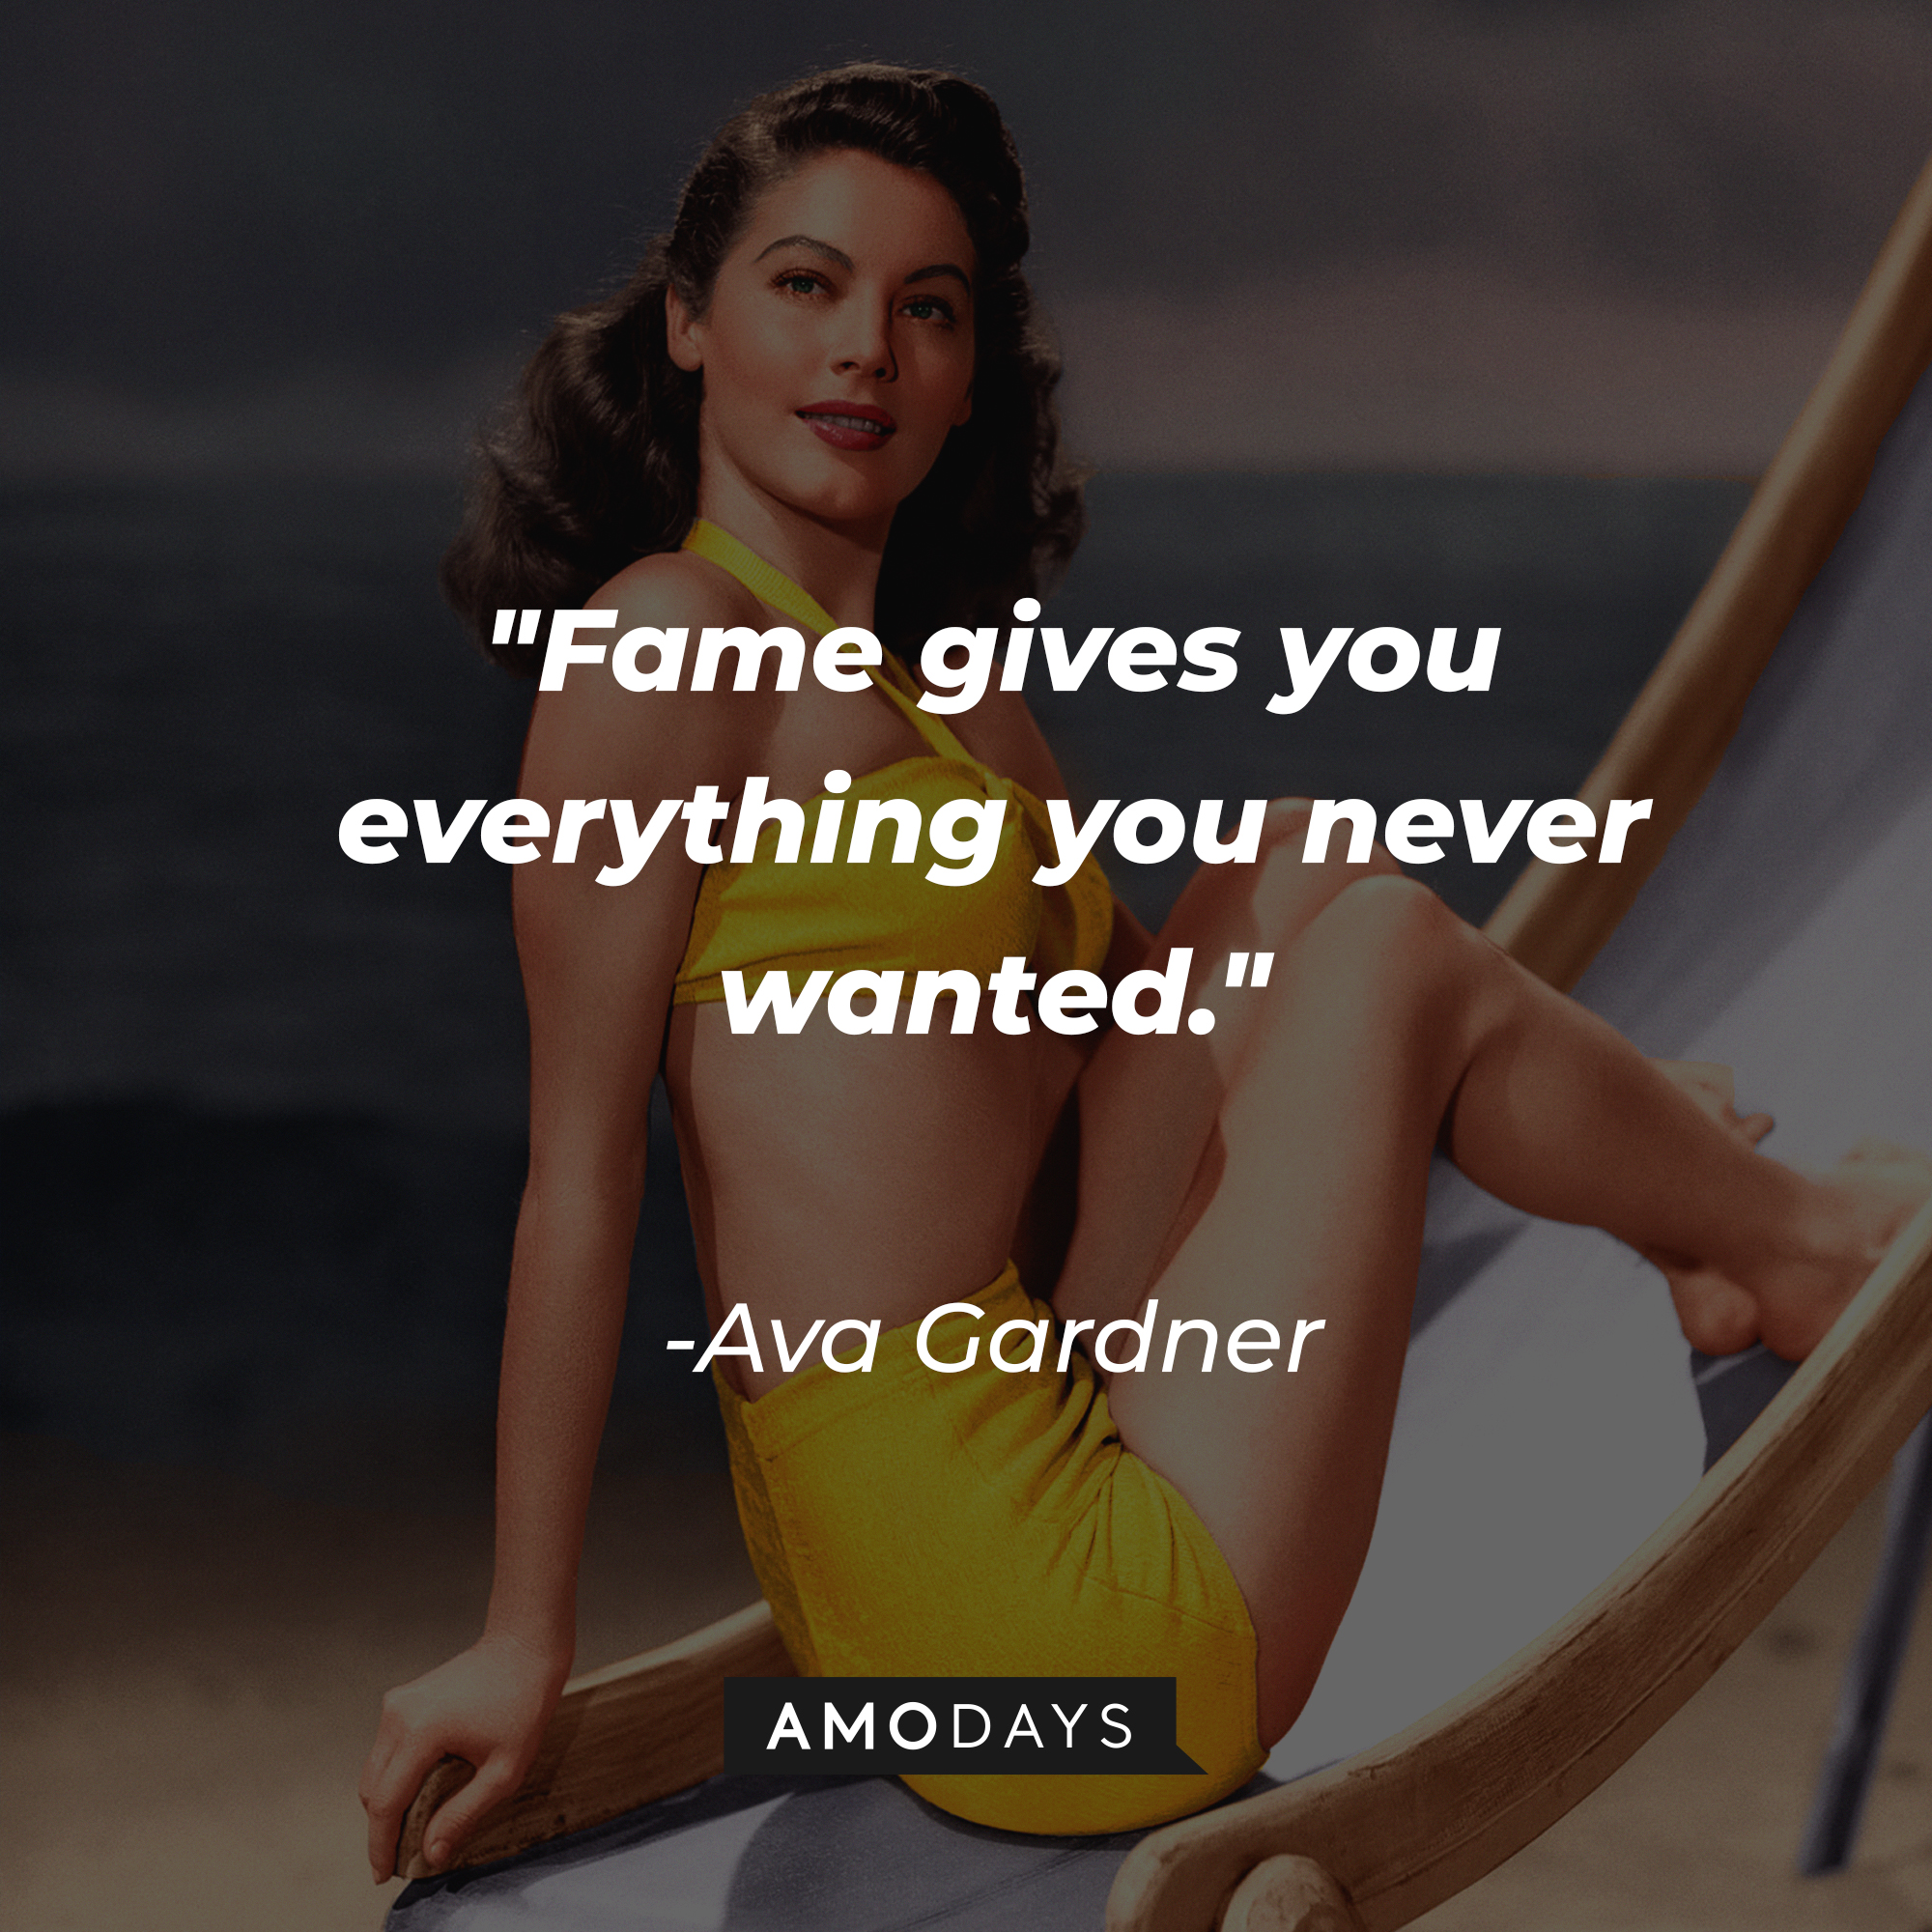 Ava Gardner with her quote: "Fame gives you everything you never wanted." | Source: Getty Images